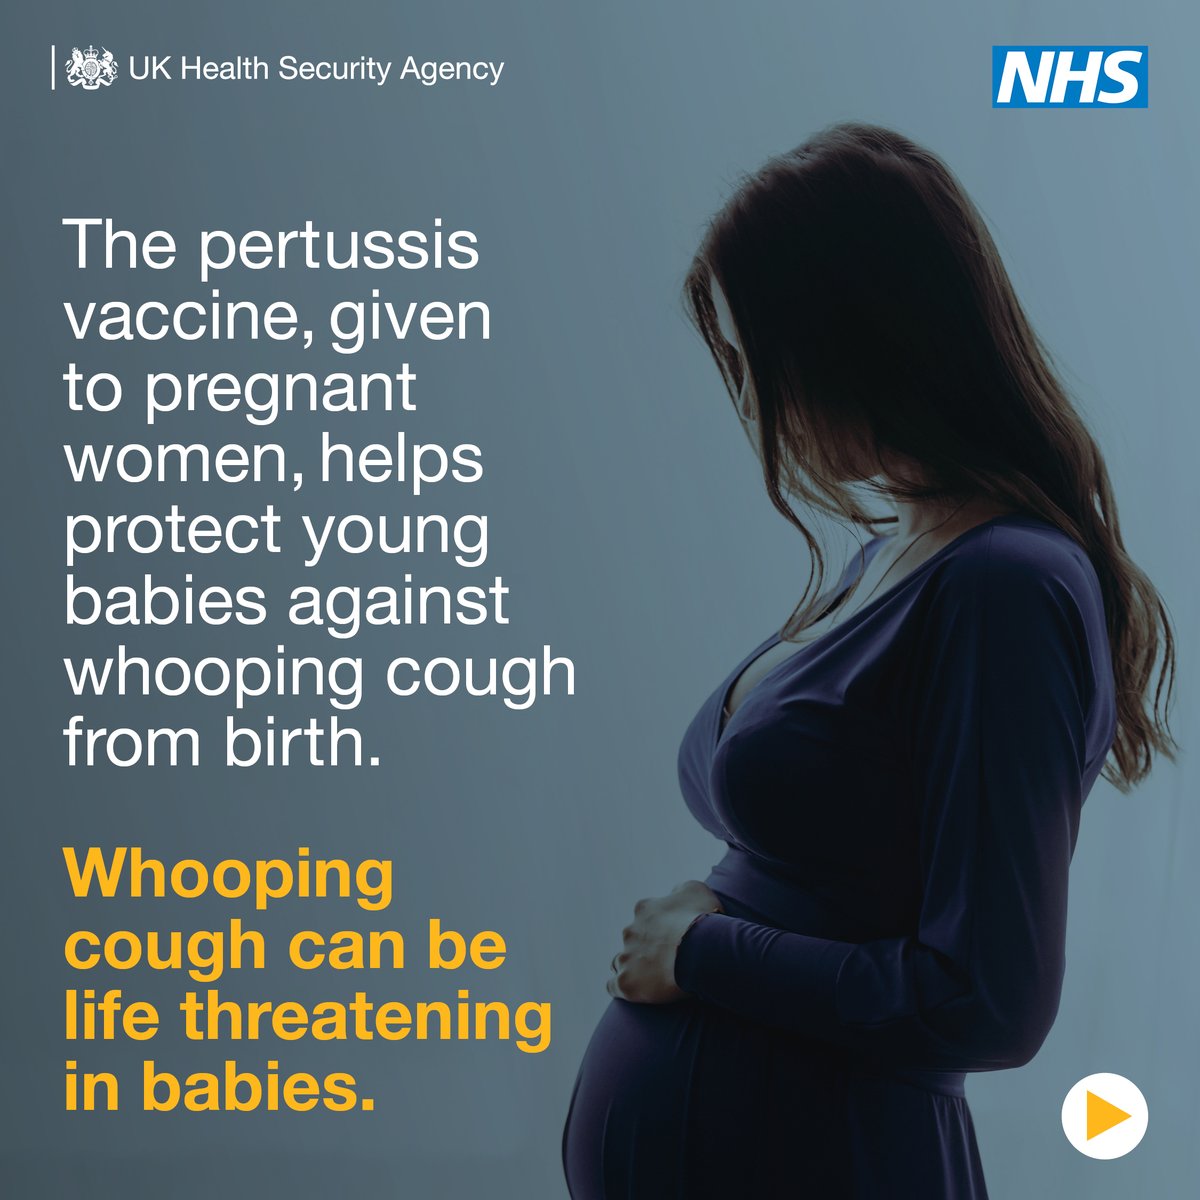 If you're pregnant, it's important to take up the #Pertussis vaccine when offered. It helps to protect your baby in their first few weeks of life, as #WhoopingCough can be life-threatening & require hospital treatment. More info🔽 ow.ly/Vgoc50RJtQx